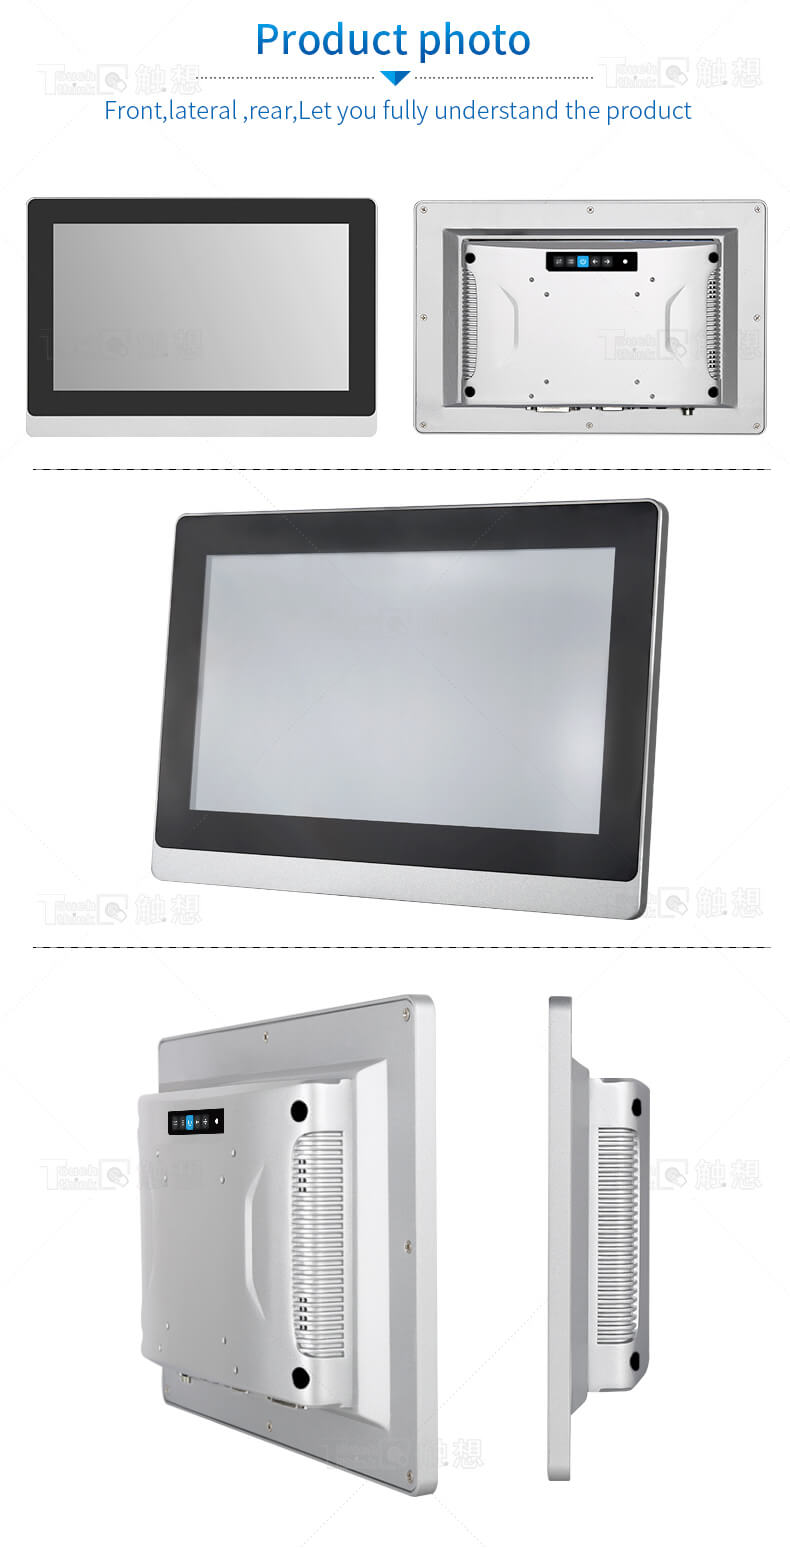 HD LCD Screen Industrial Monitor Factory Price 10.1"